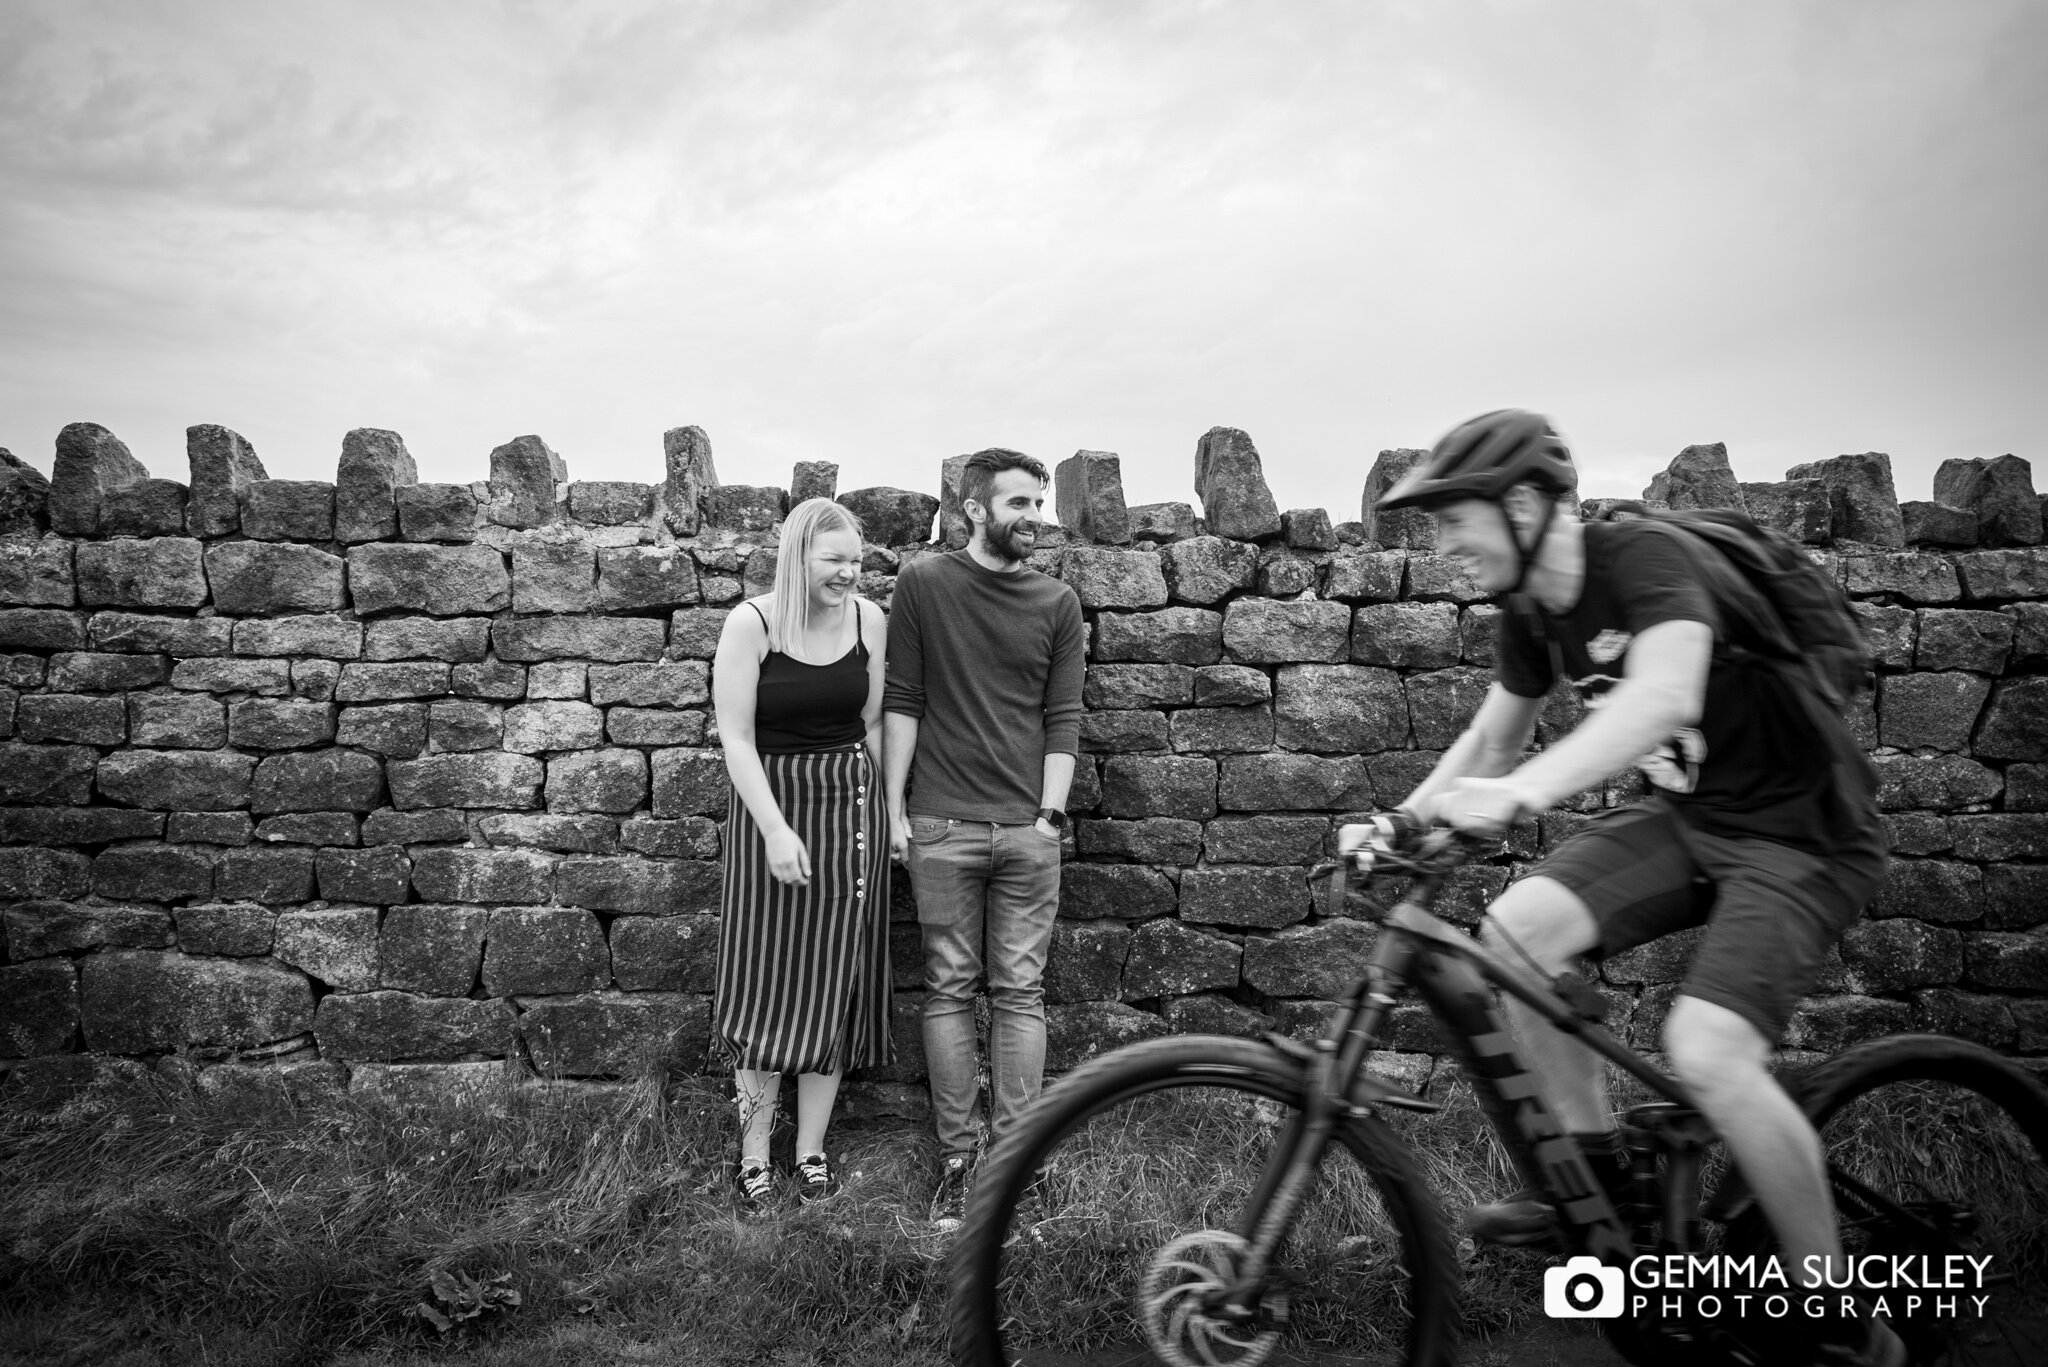 a cyclist photo bomb an engagement photo